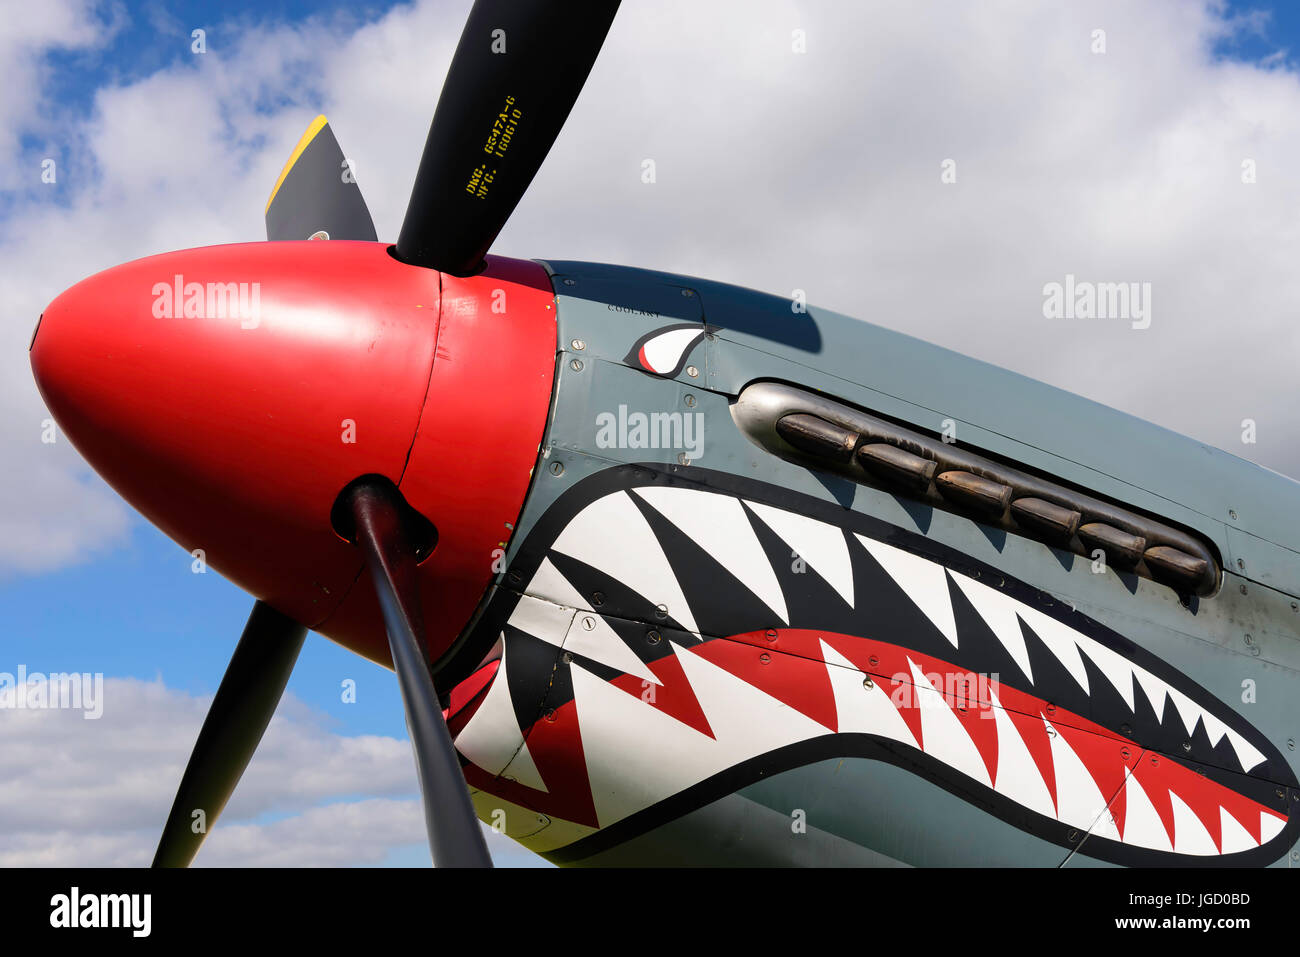 Plane With Shark Mouth